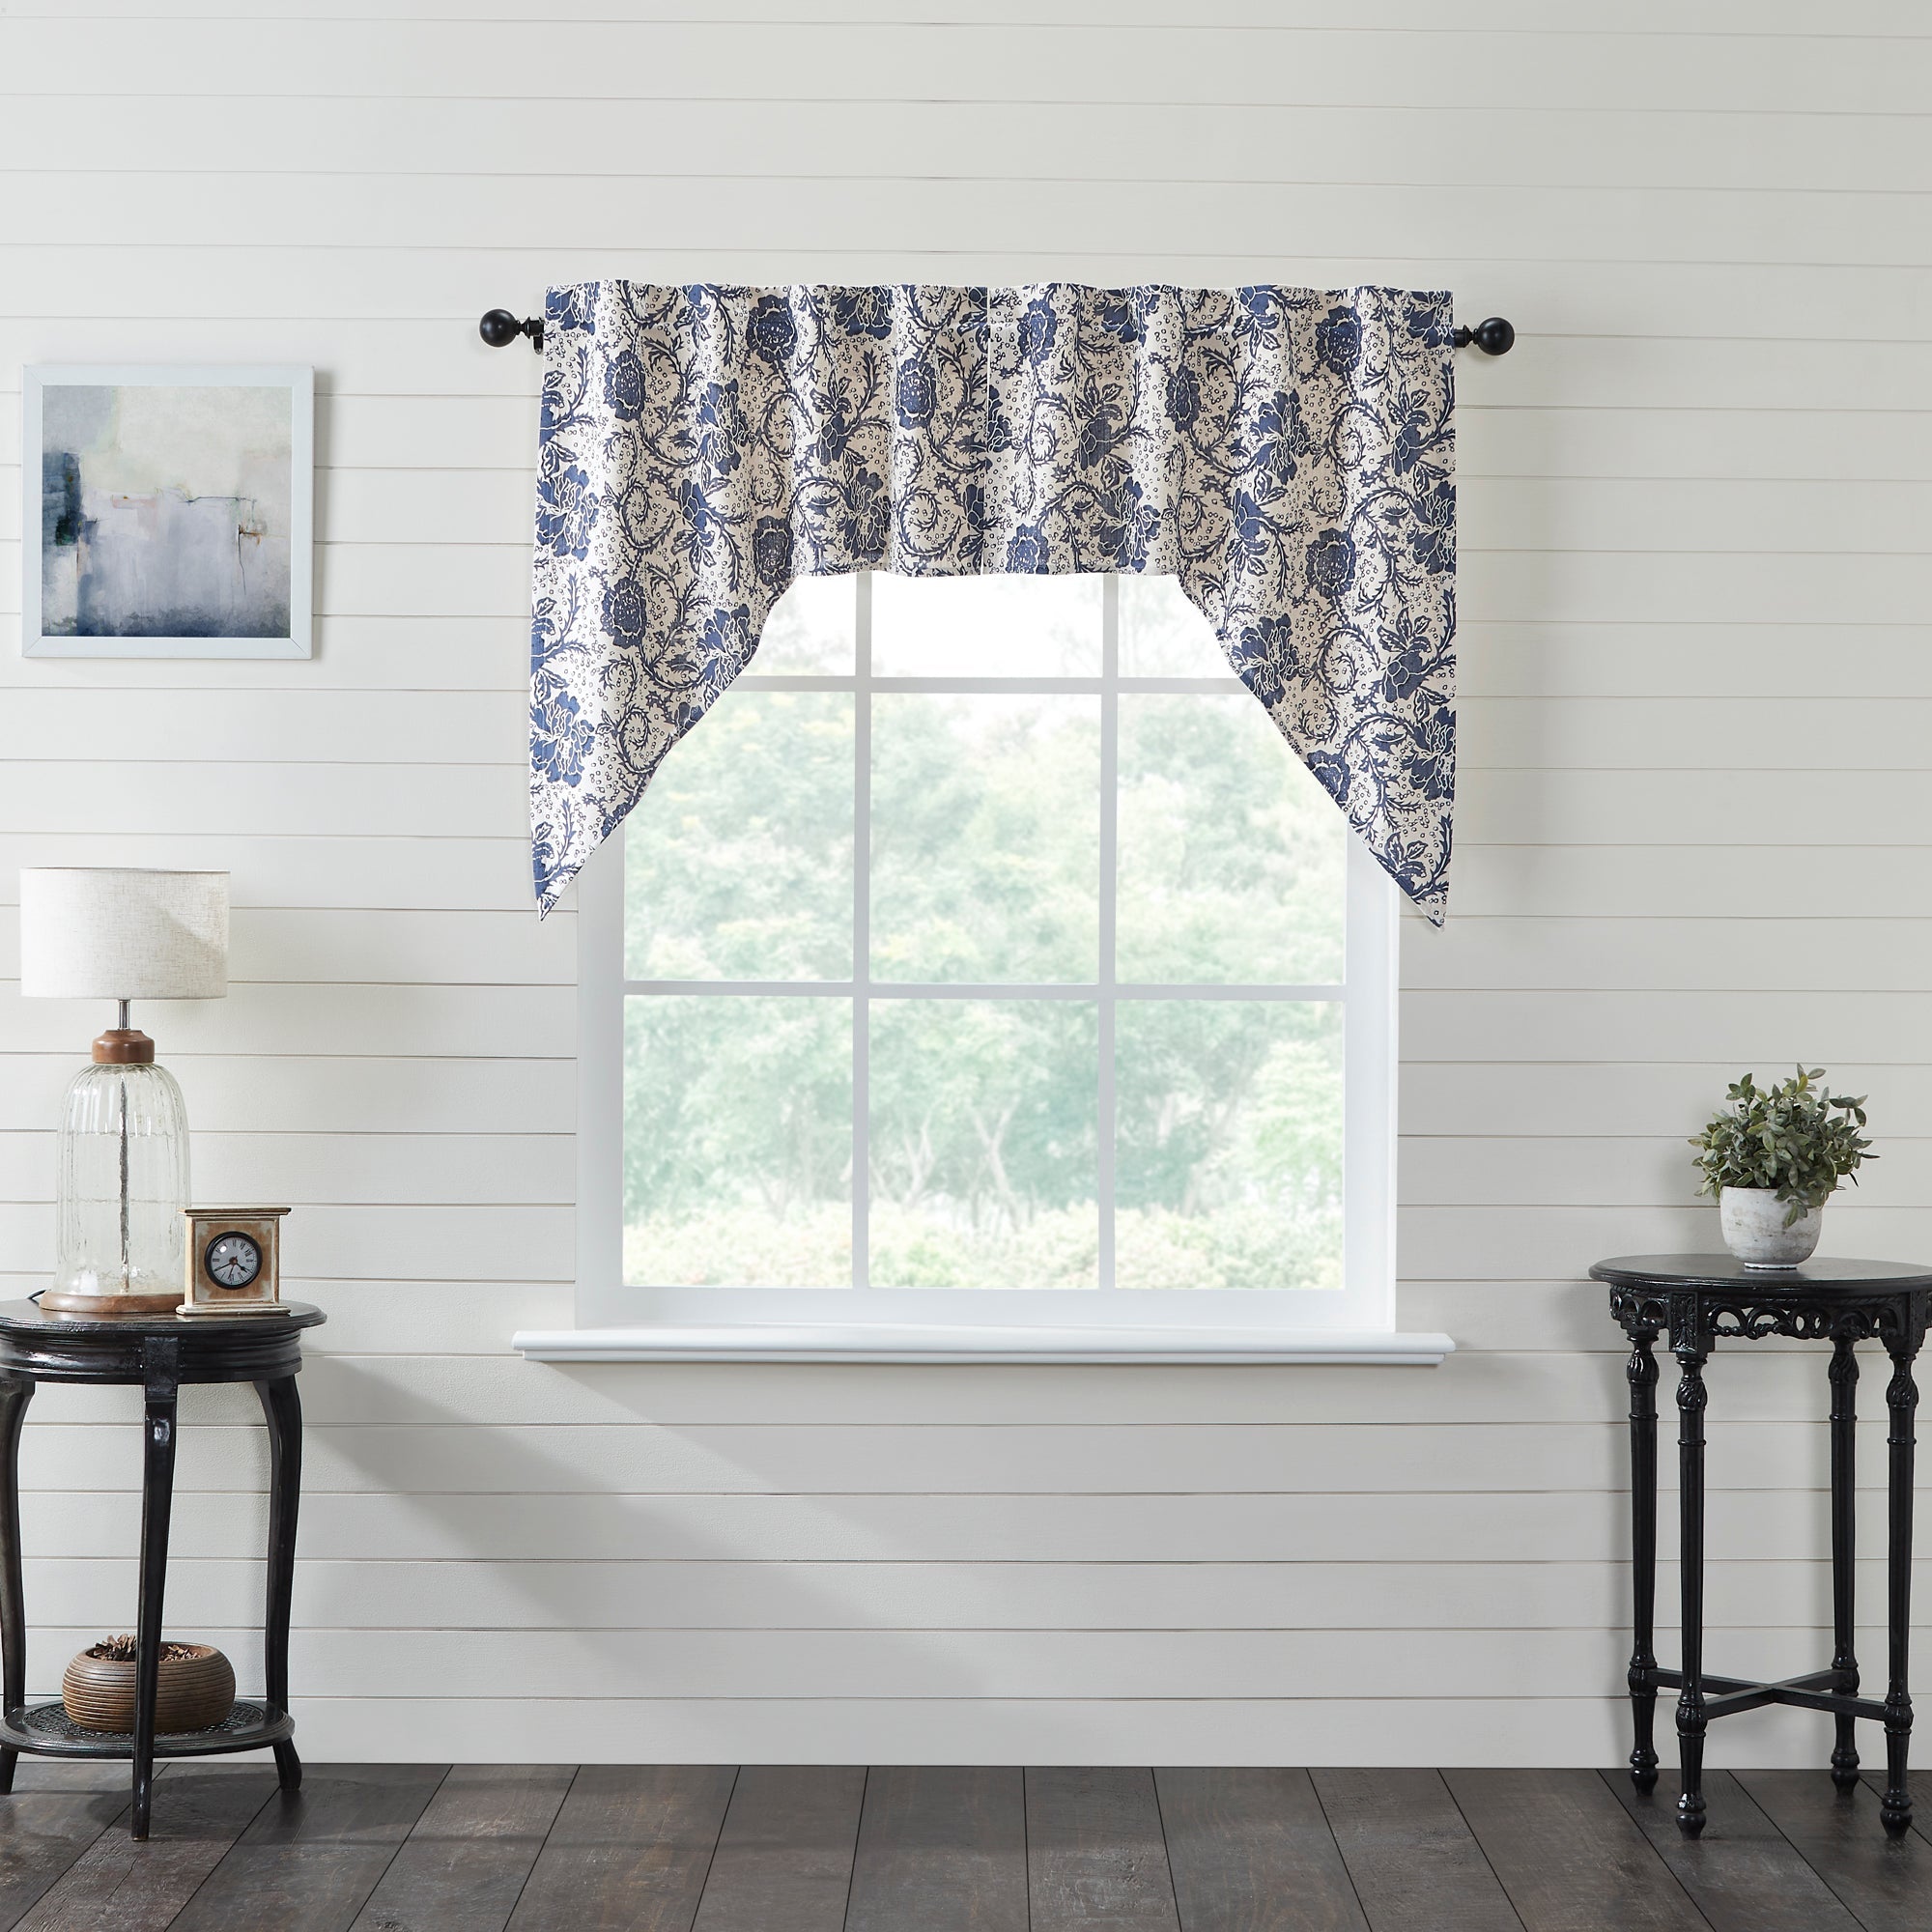 Dorset Navy Floral Swag Curtain Set of 2 36x36x16 VHC Brands